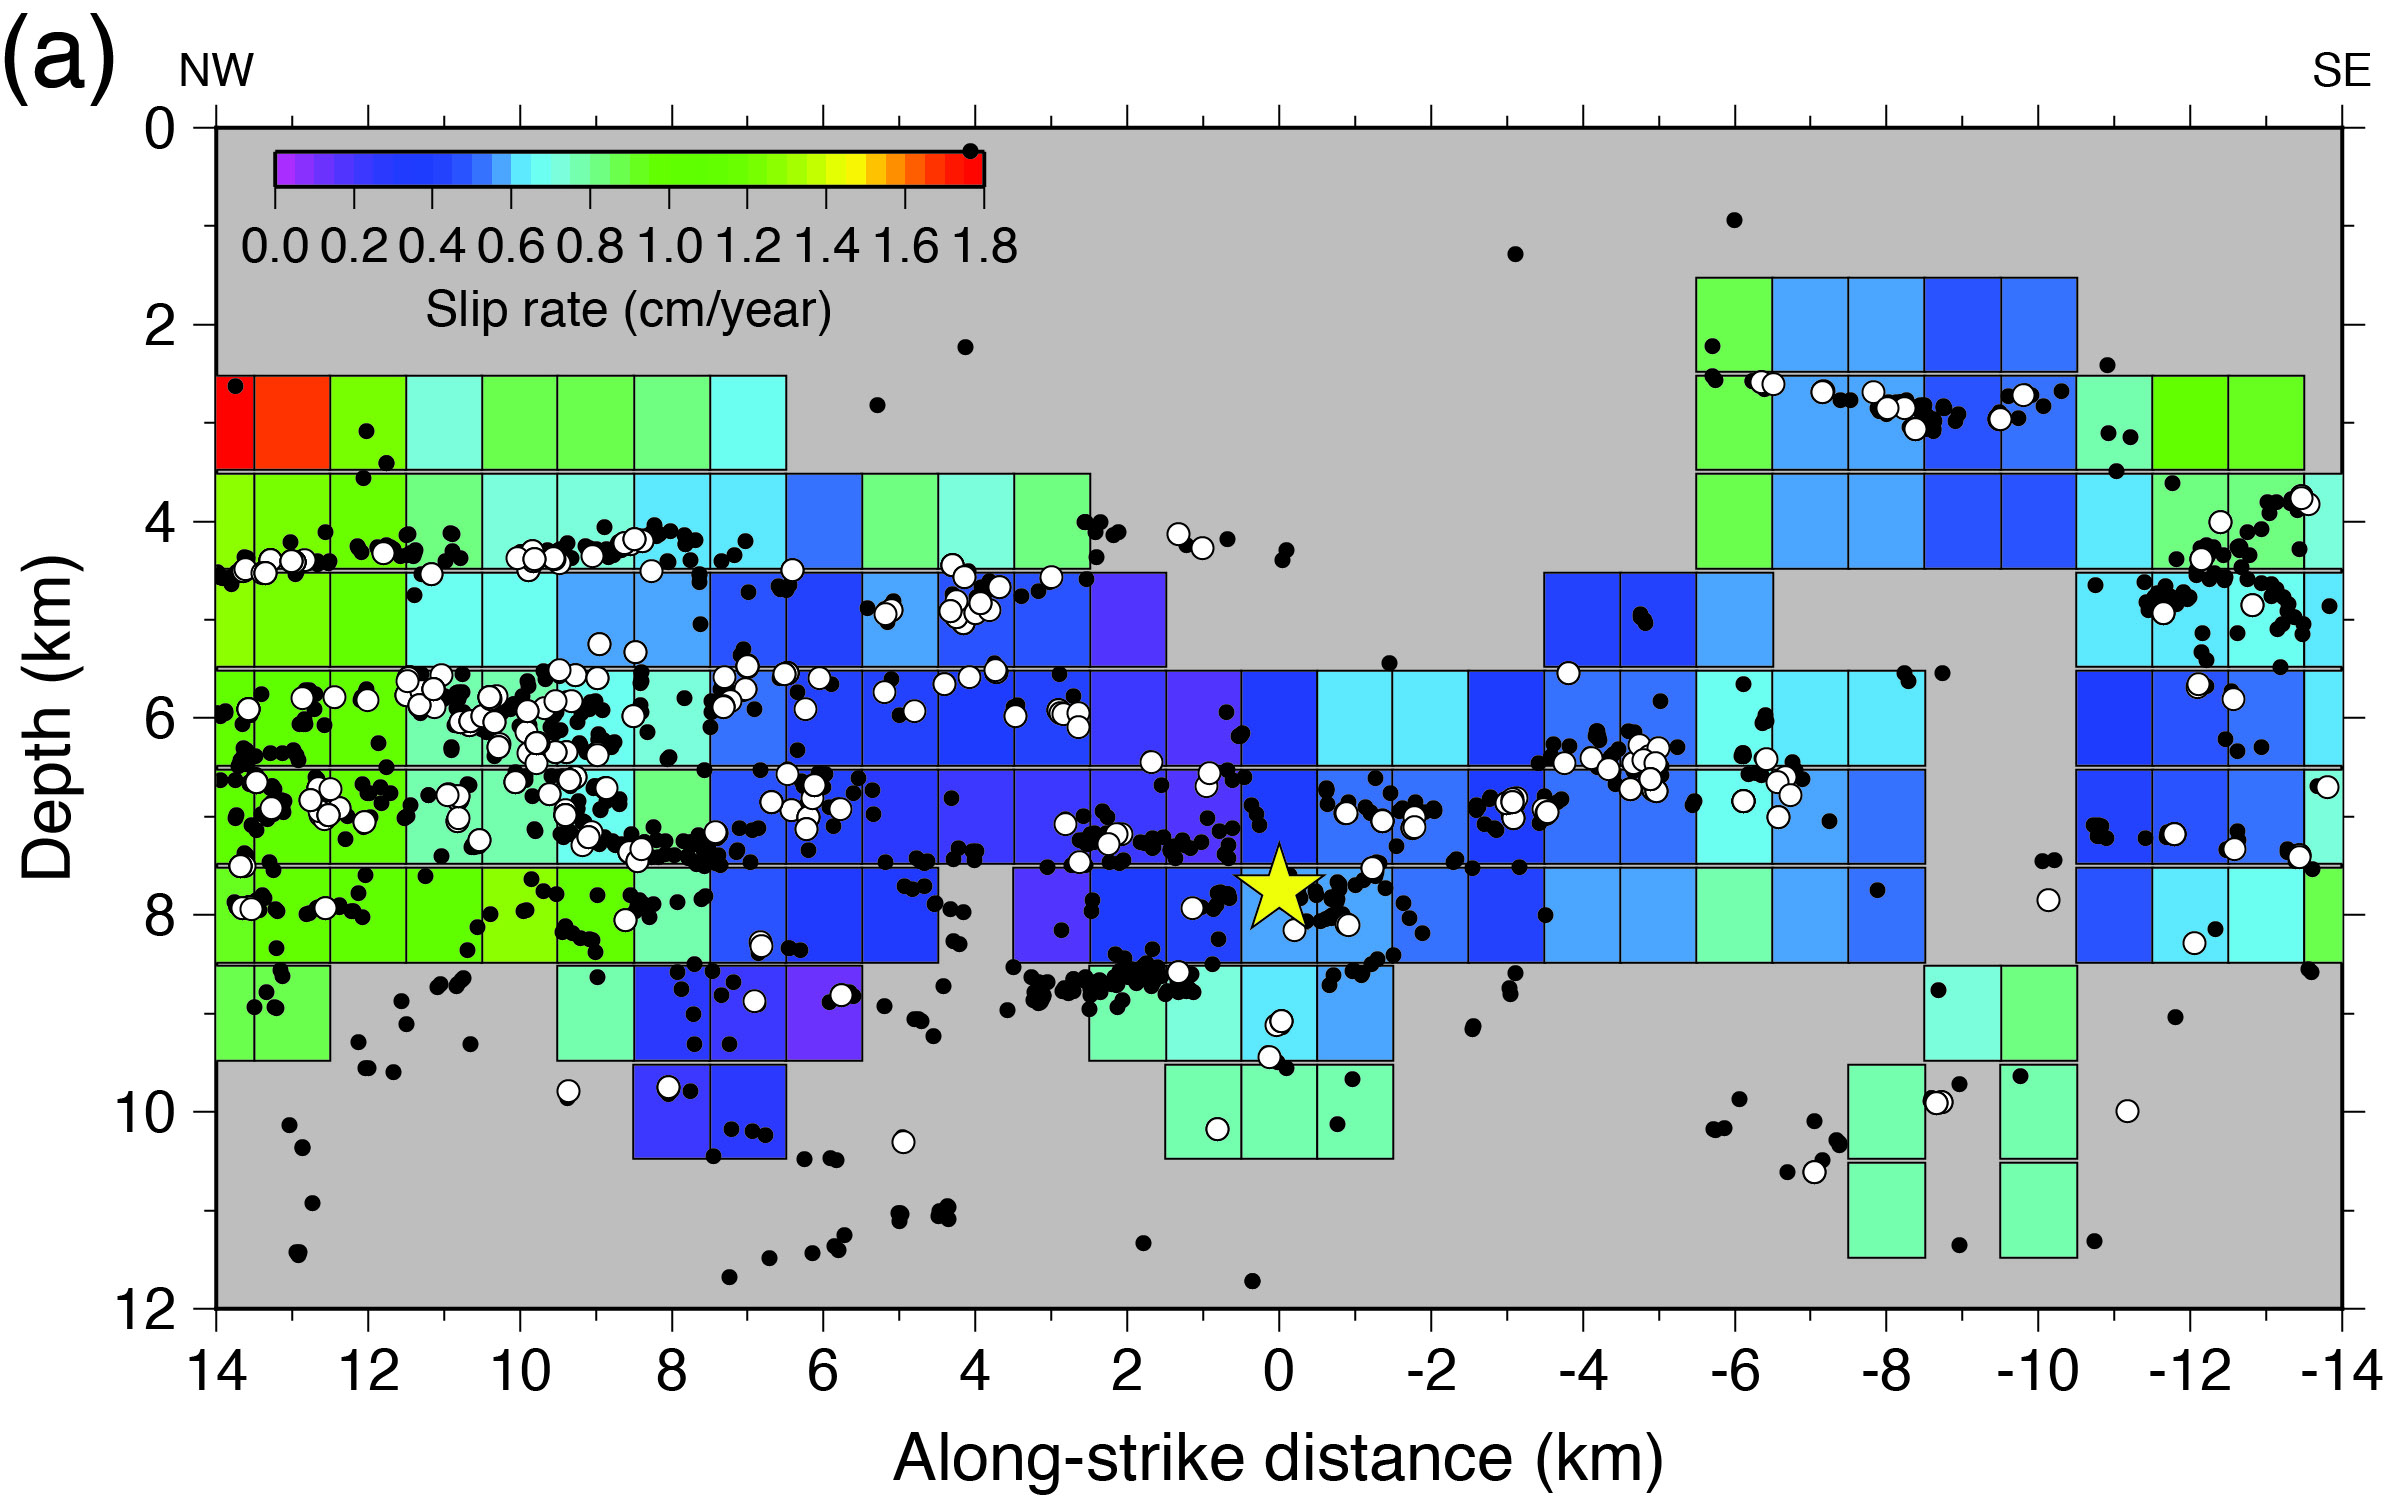 spatial and temporal variations in fault slip near the 1998 Mw 5.1 earthquake that is the largest instrumentally observed earthquake in the San Juan Bautista area (Taira et al., 2014)